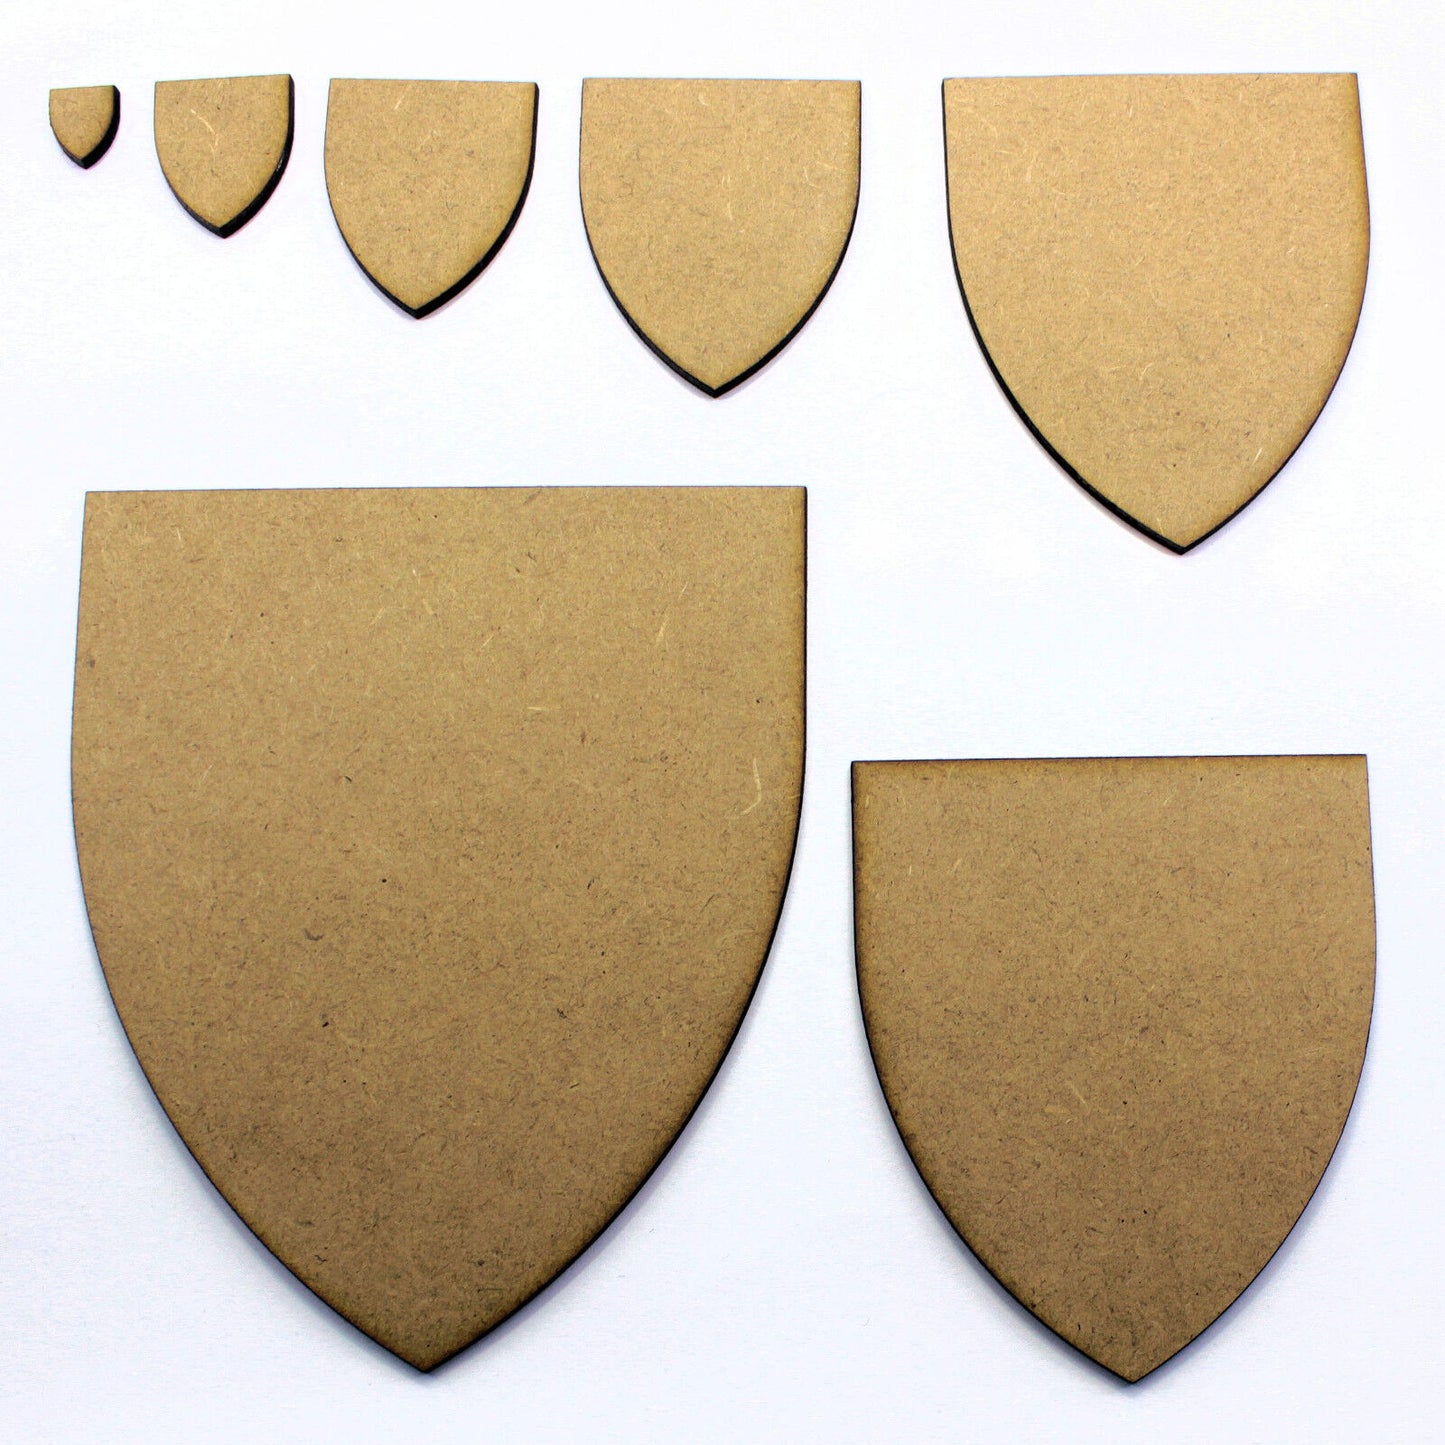 Heater Shield Shapes. Medieval and Heraldry School Crafts, 2mm MDF Wood